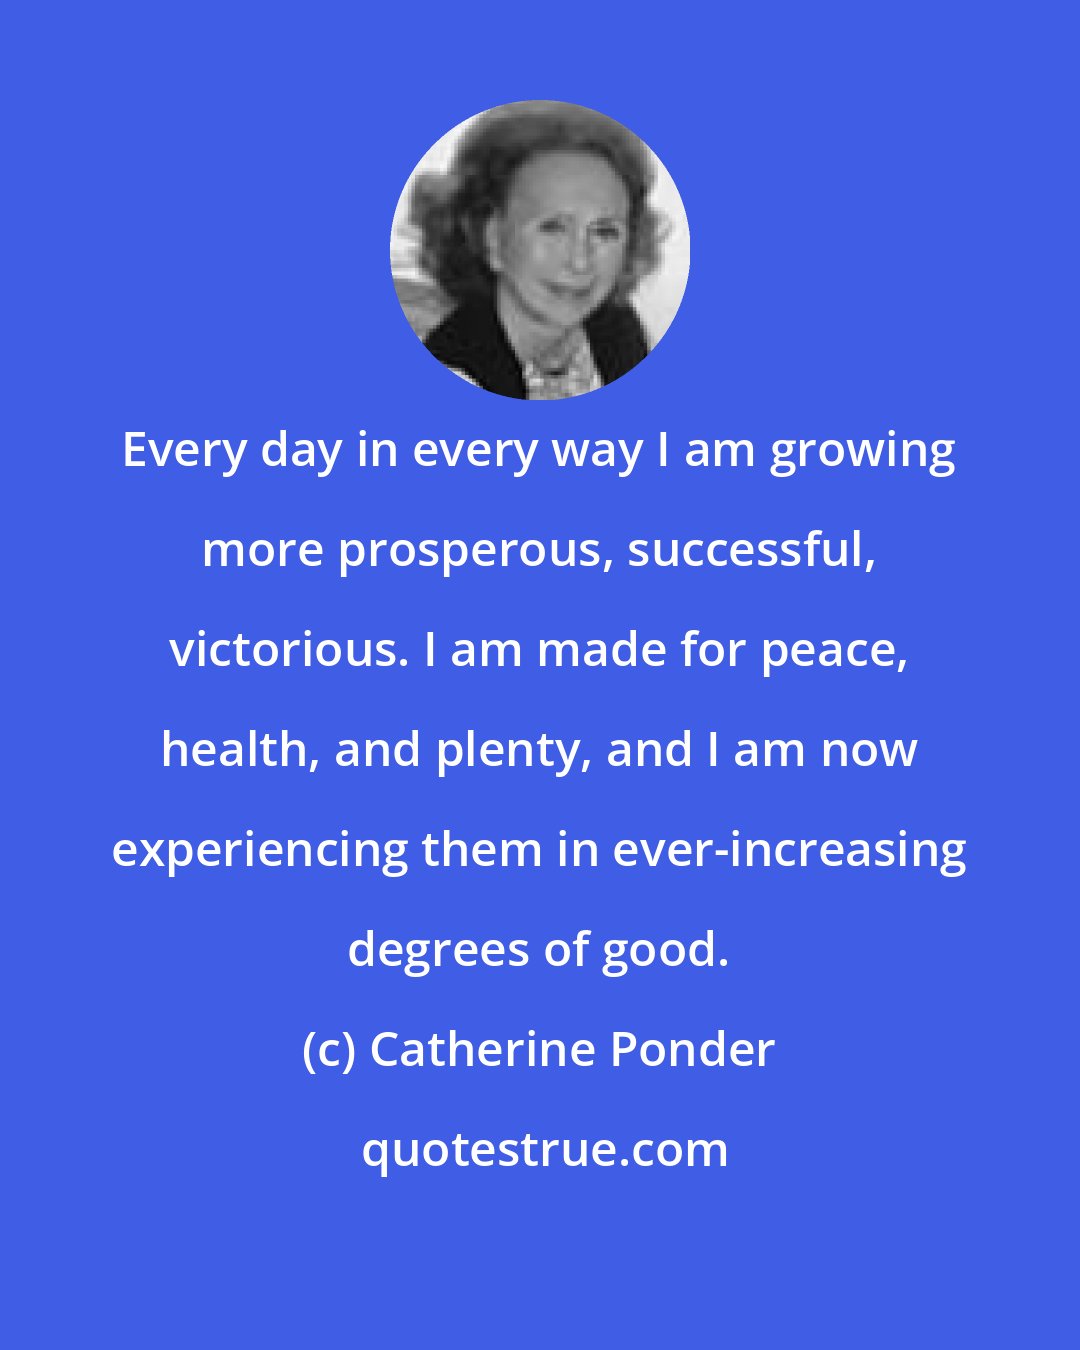 Catherine Ponder: Every day in every way I am growing more prosperous, successful, victorious. I am made for peace, health, and plenty, and I am now experiencing them in ever-increasing degrees of good.